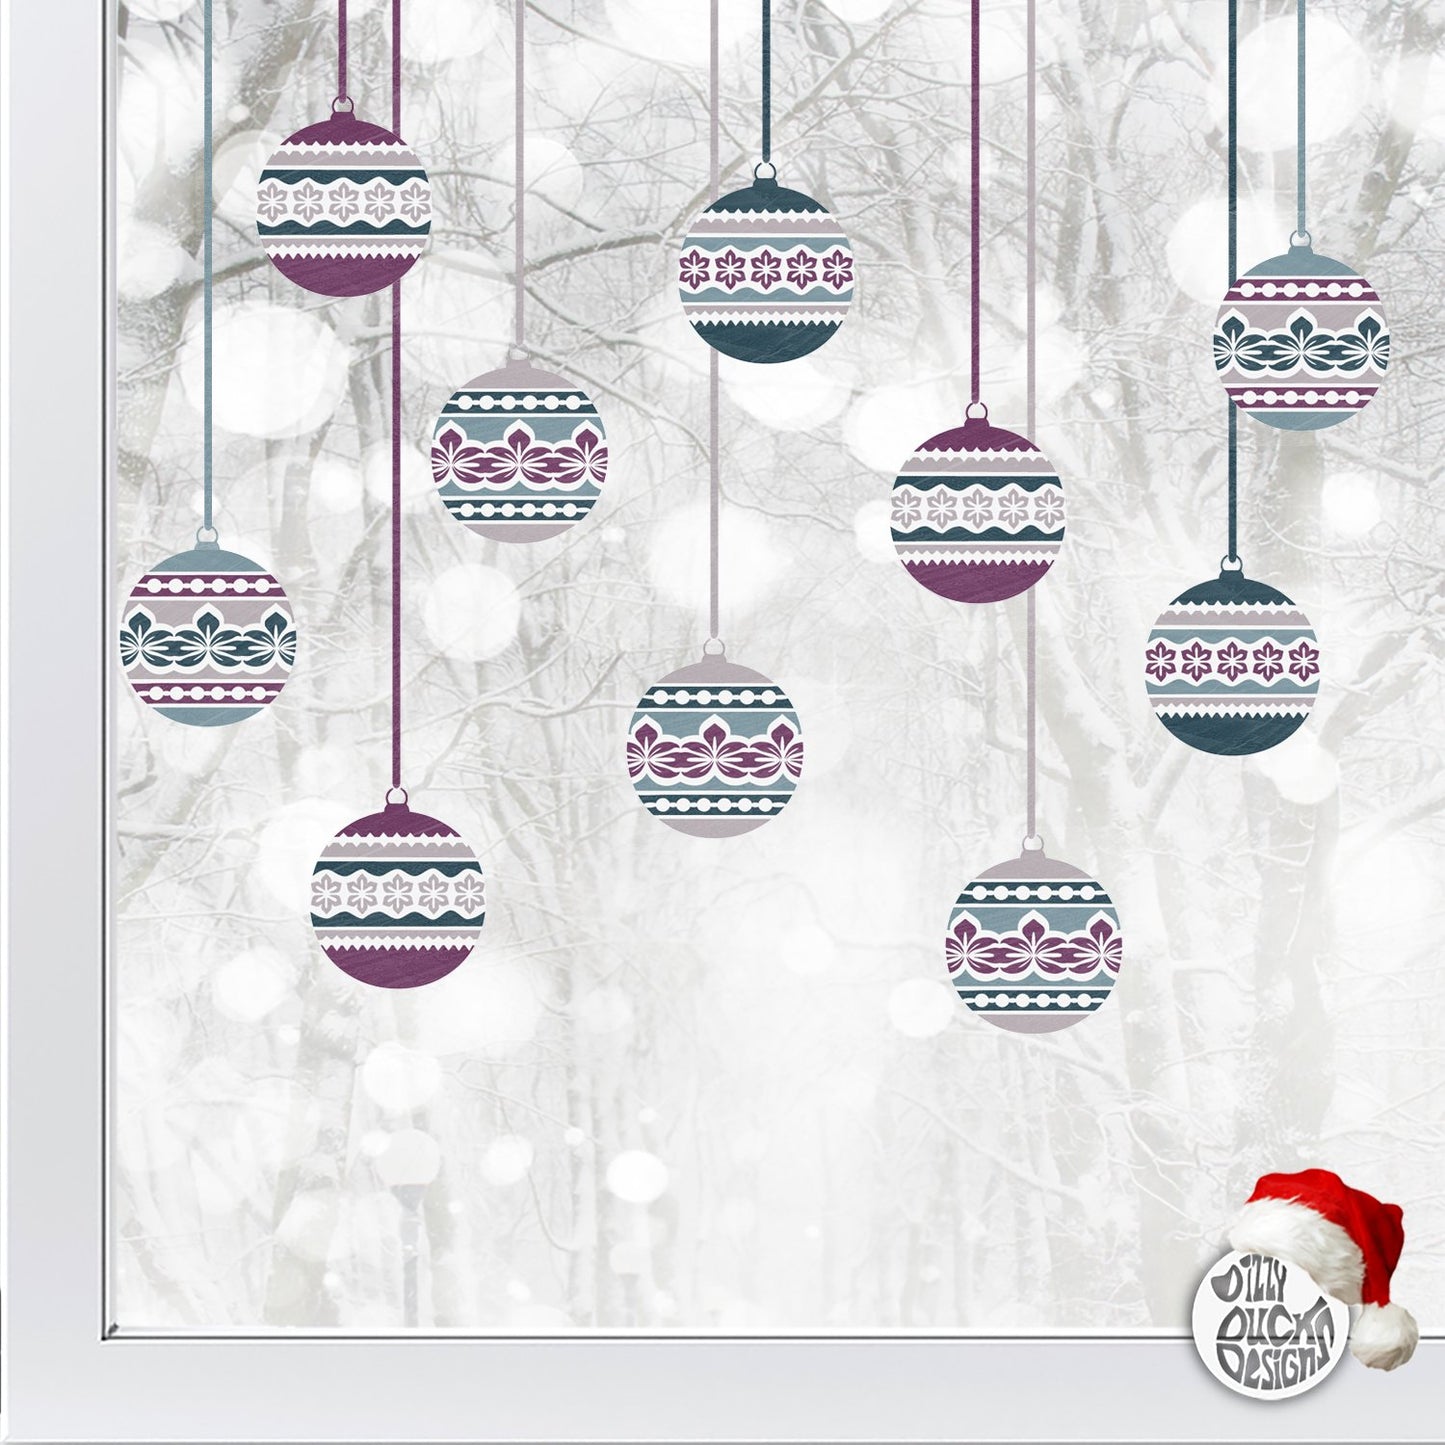 Decal Copy of 10 Nordic Christmas Bauble Window Decals - Boho Dizzy Duck Designs